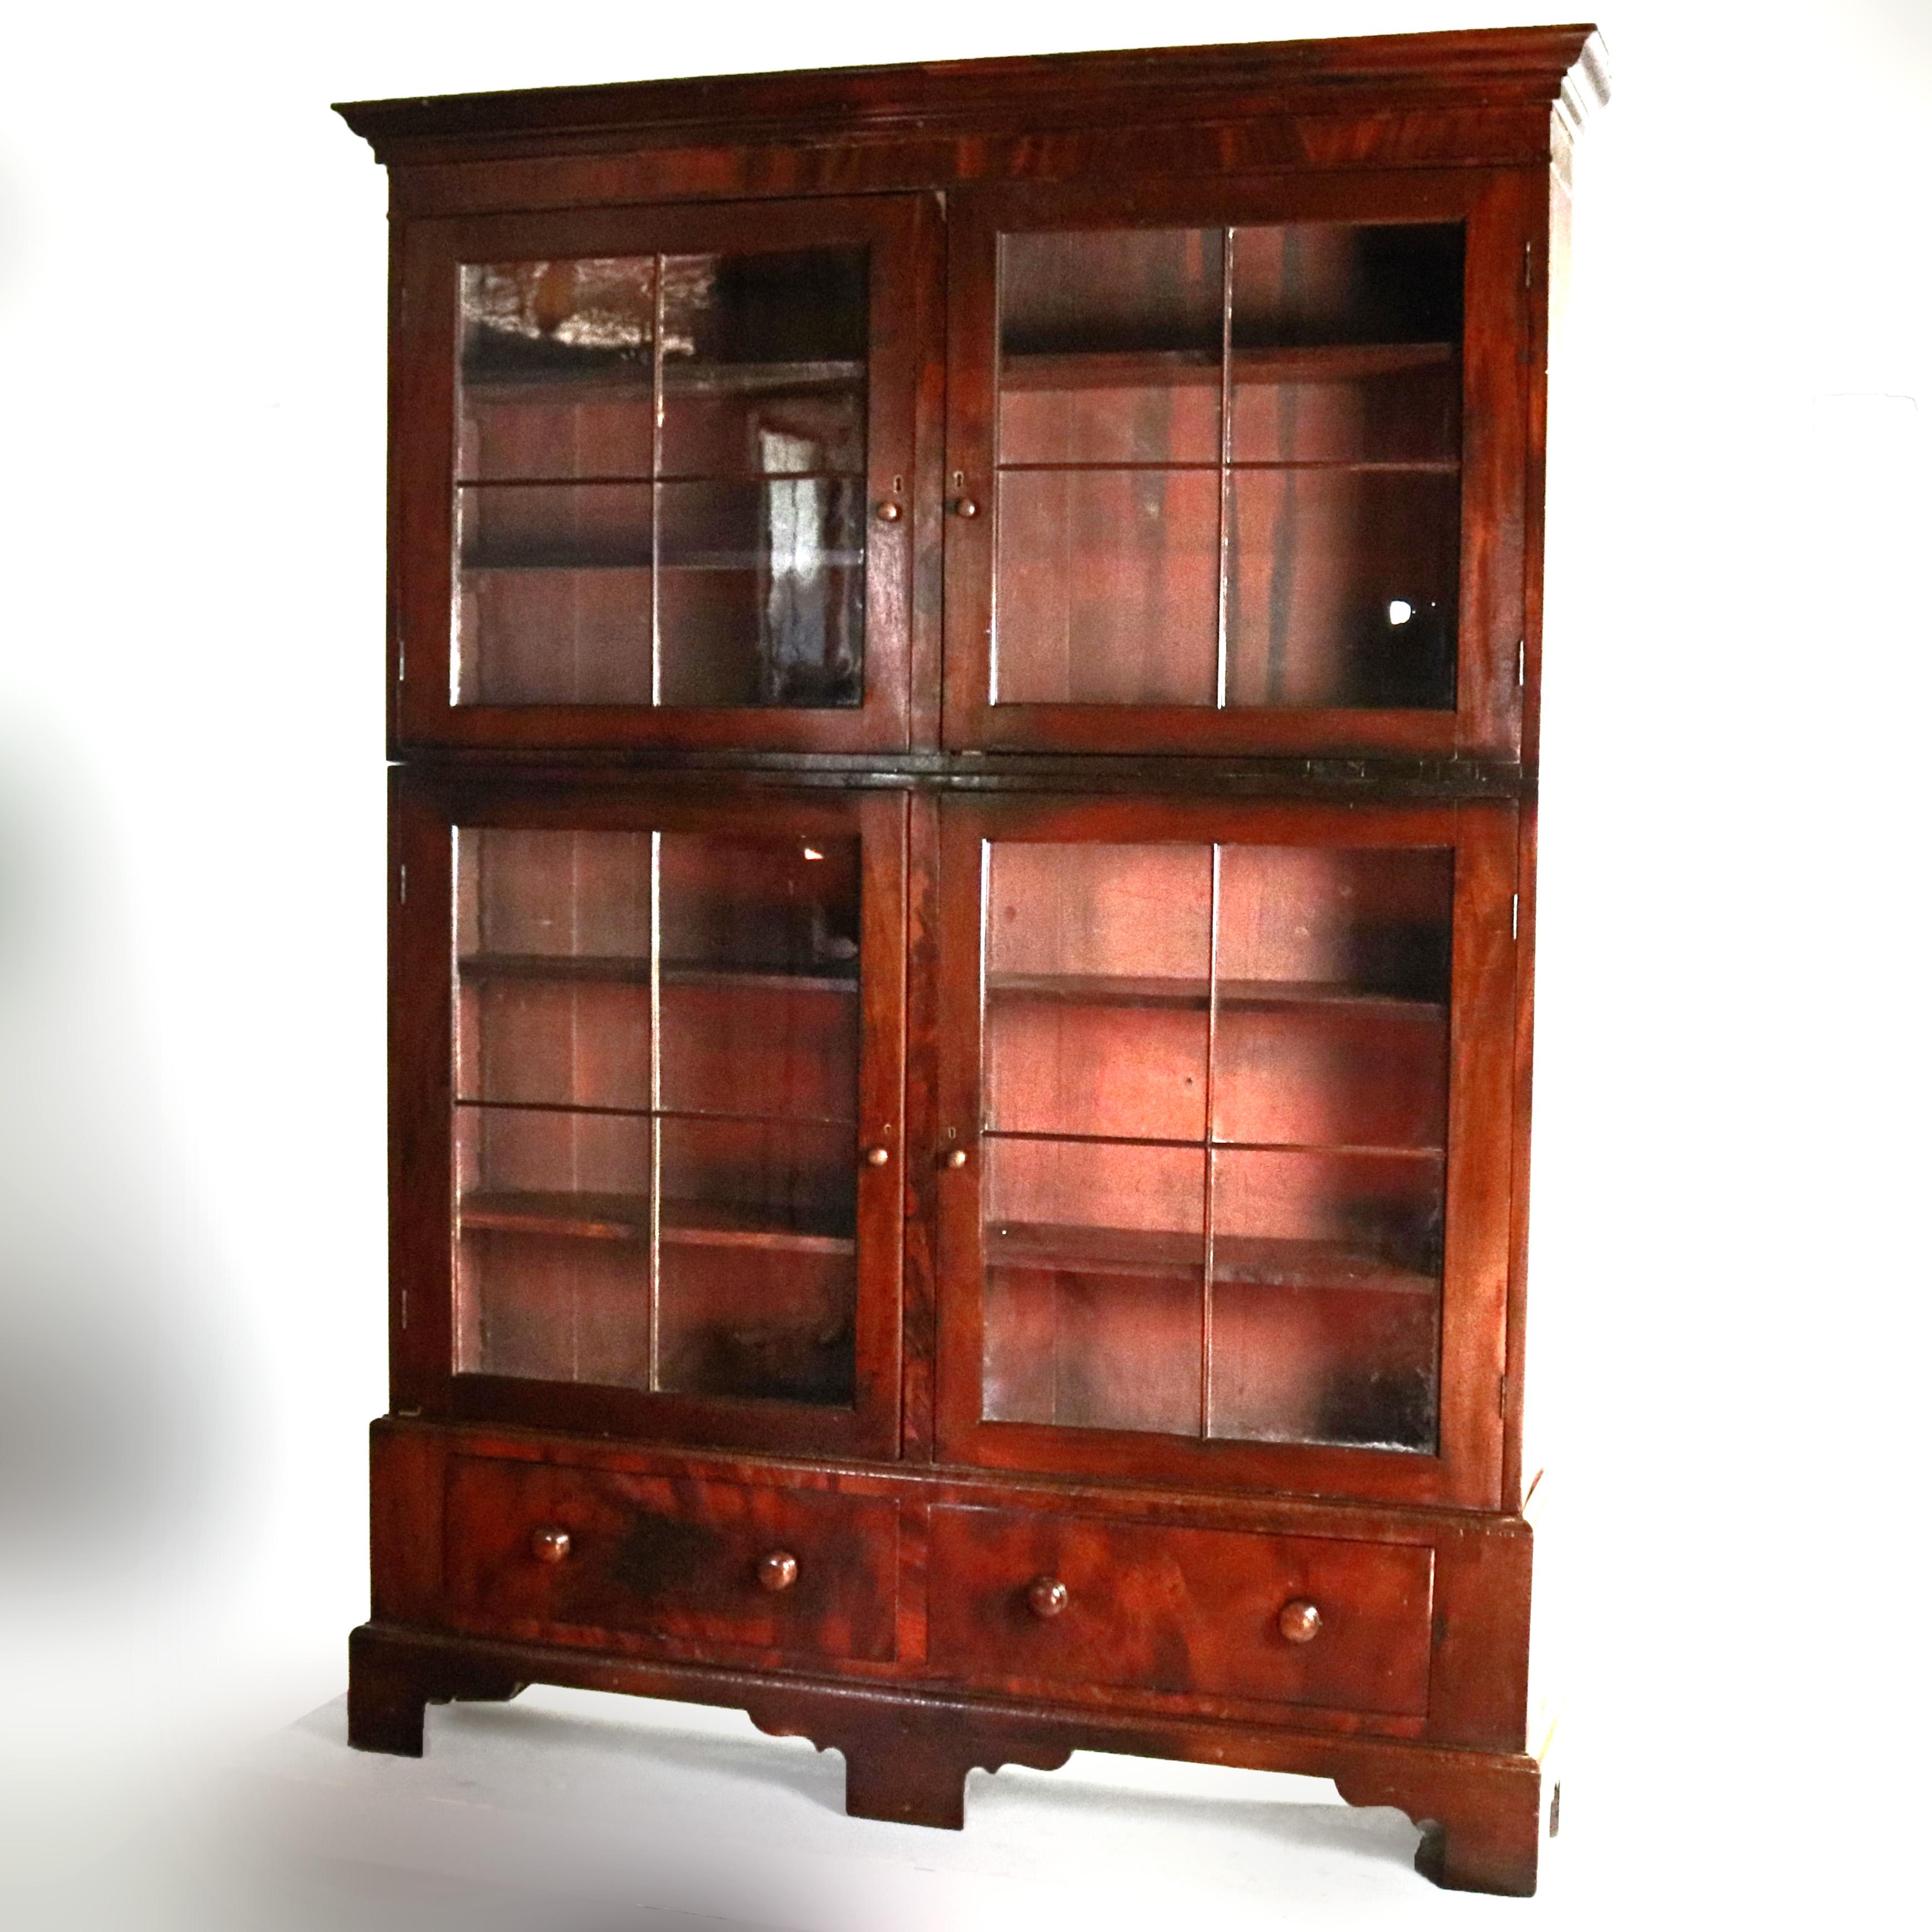 A large and early 19th century American Empire bookcase offers flame mahogany construction with three sections including two double glass door cabinets opening to shelved interiors and lower case having two drawers and raised on bracket feet, circa